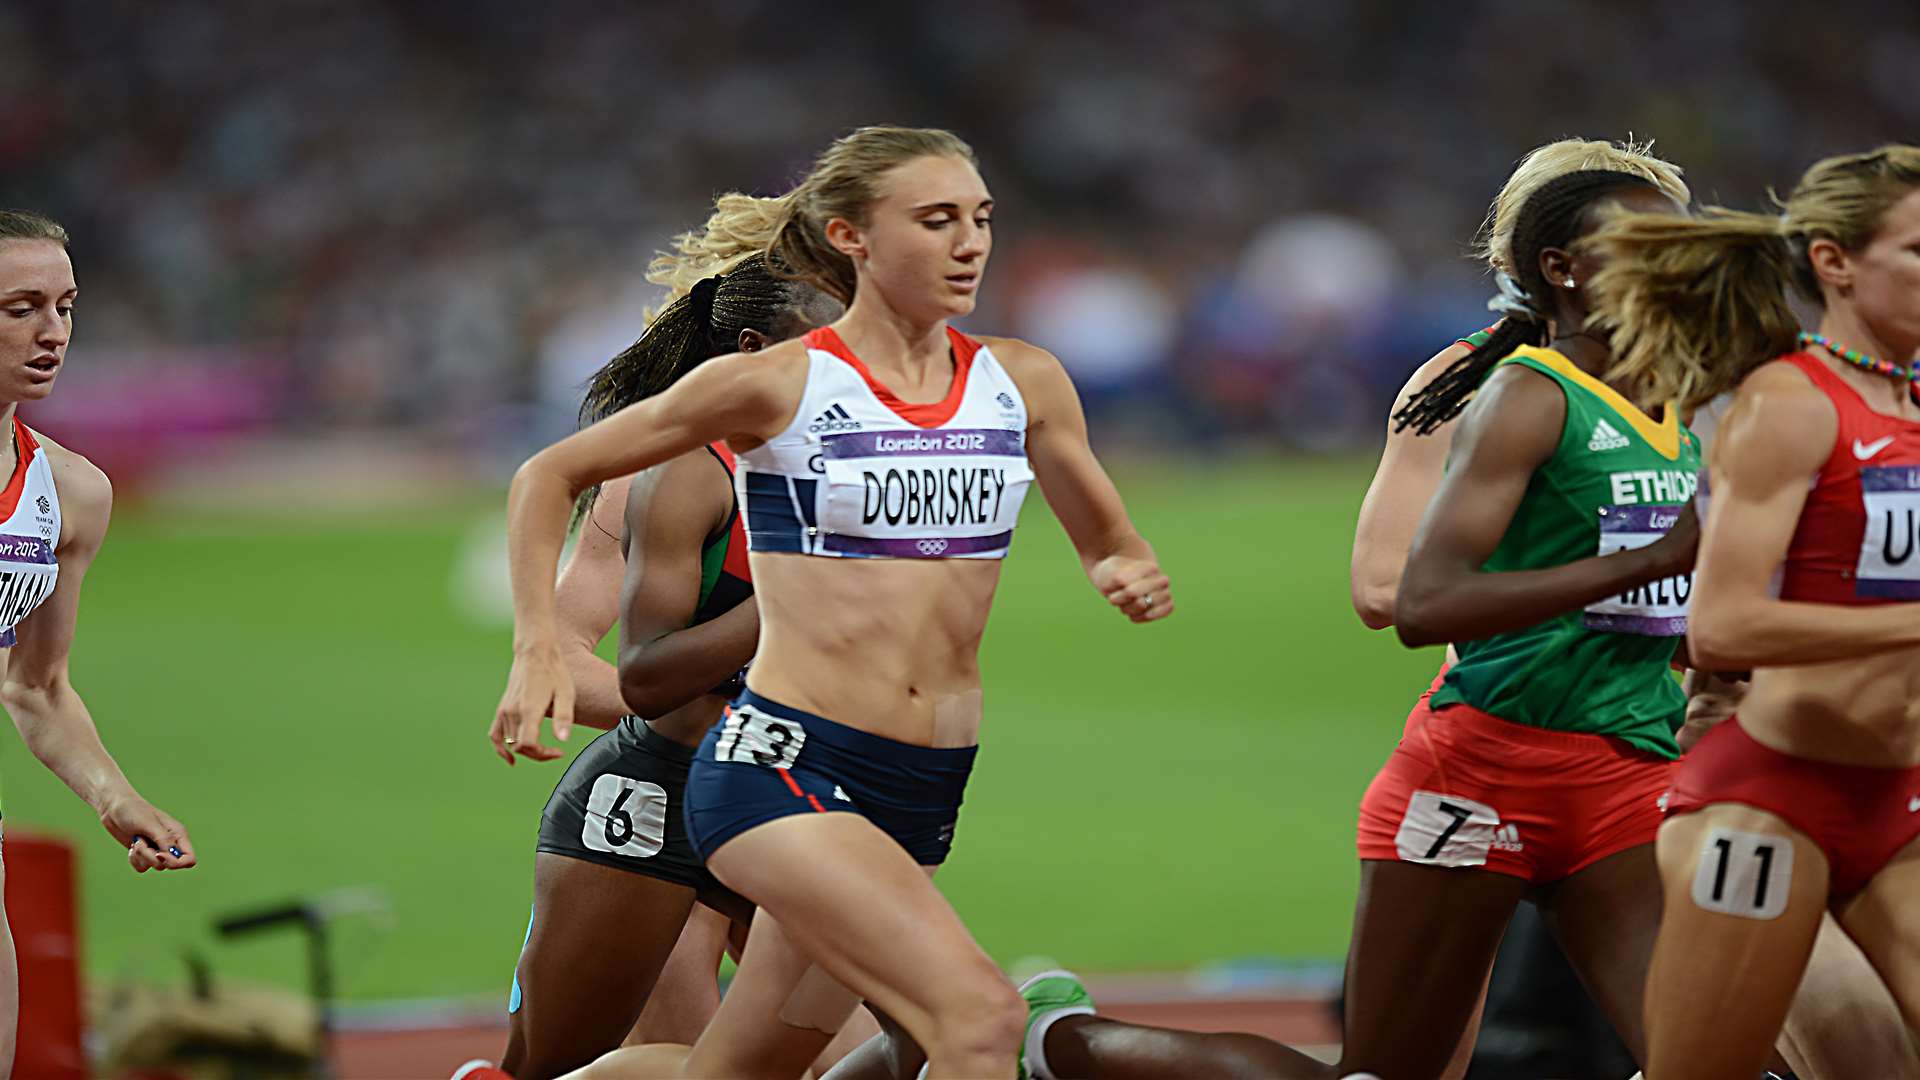 Lisa Dobriskey in London 2012 1,500m Final action. Picture: Barry Goodwin.